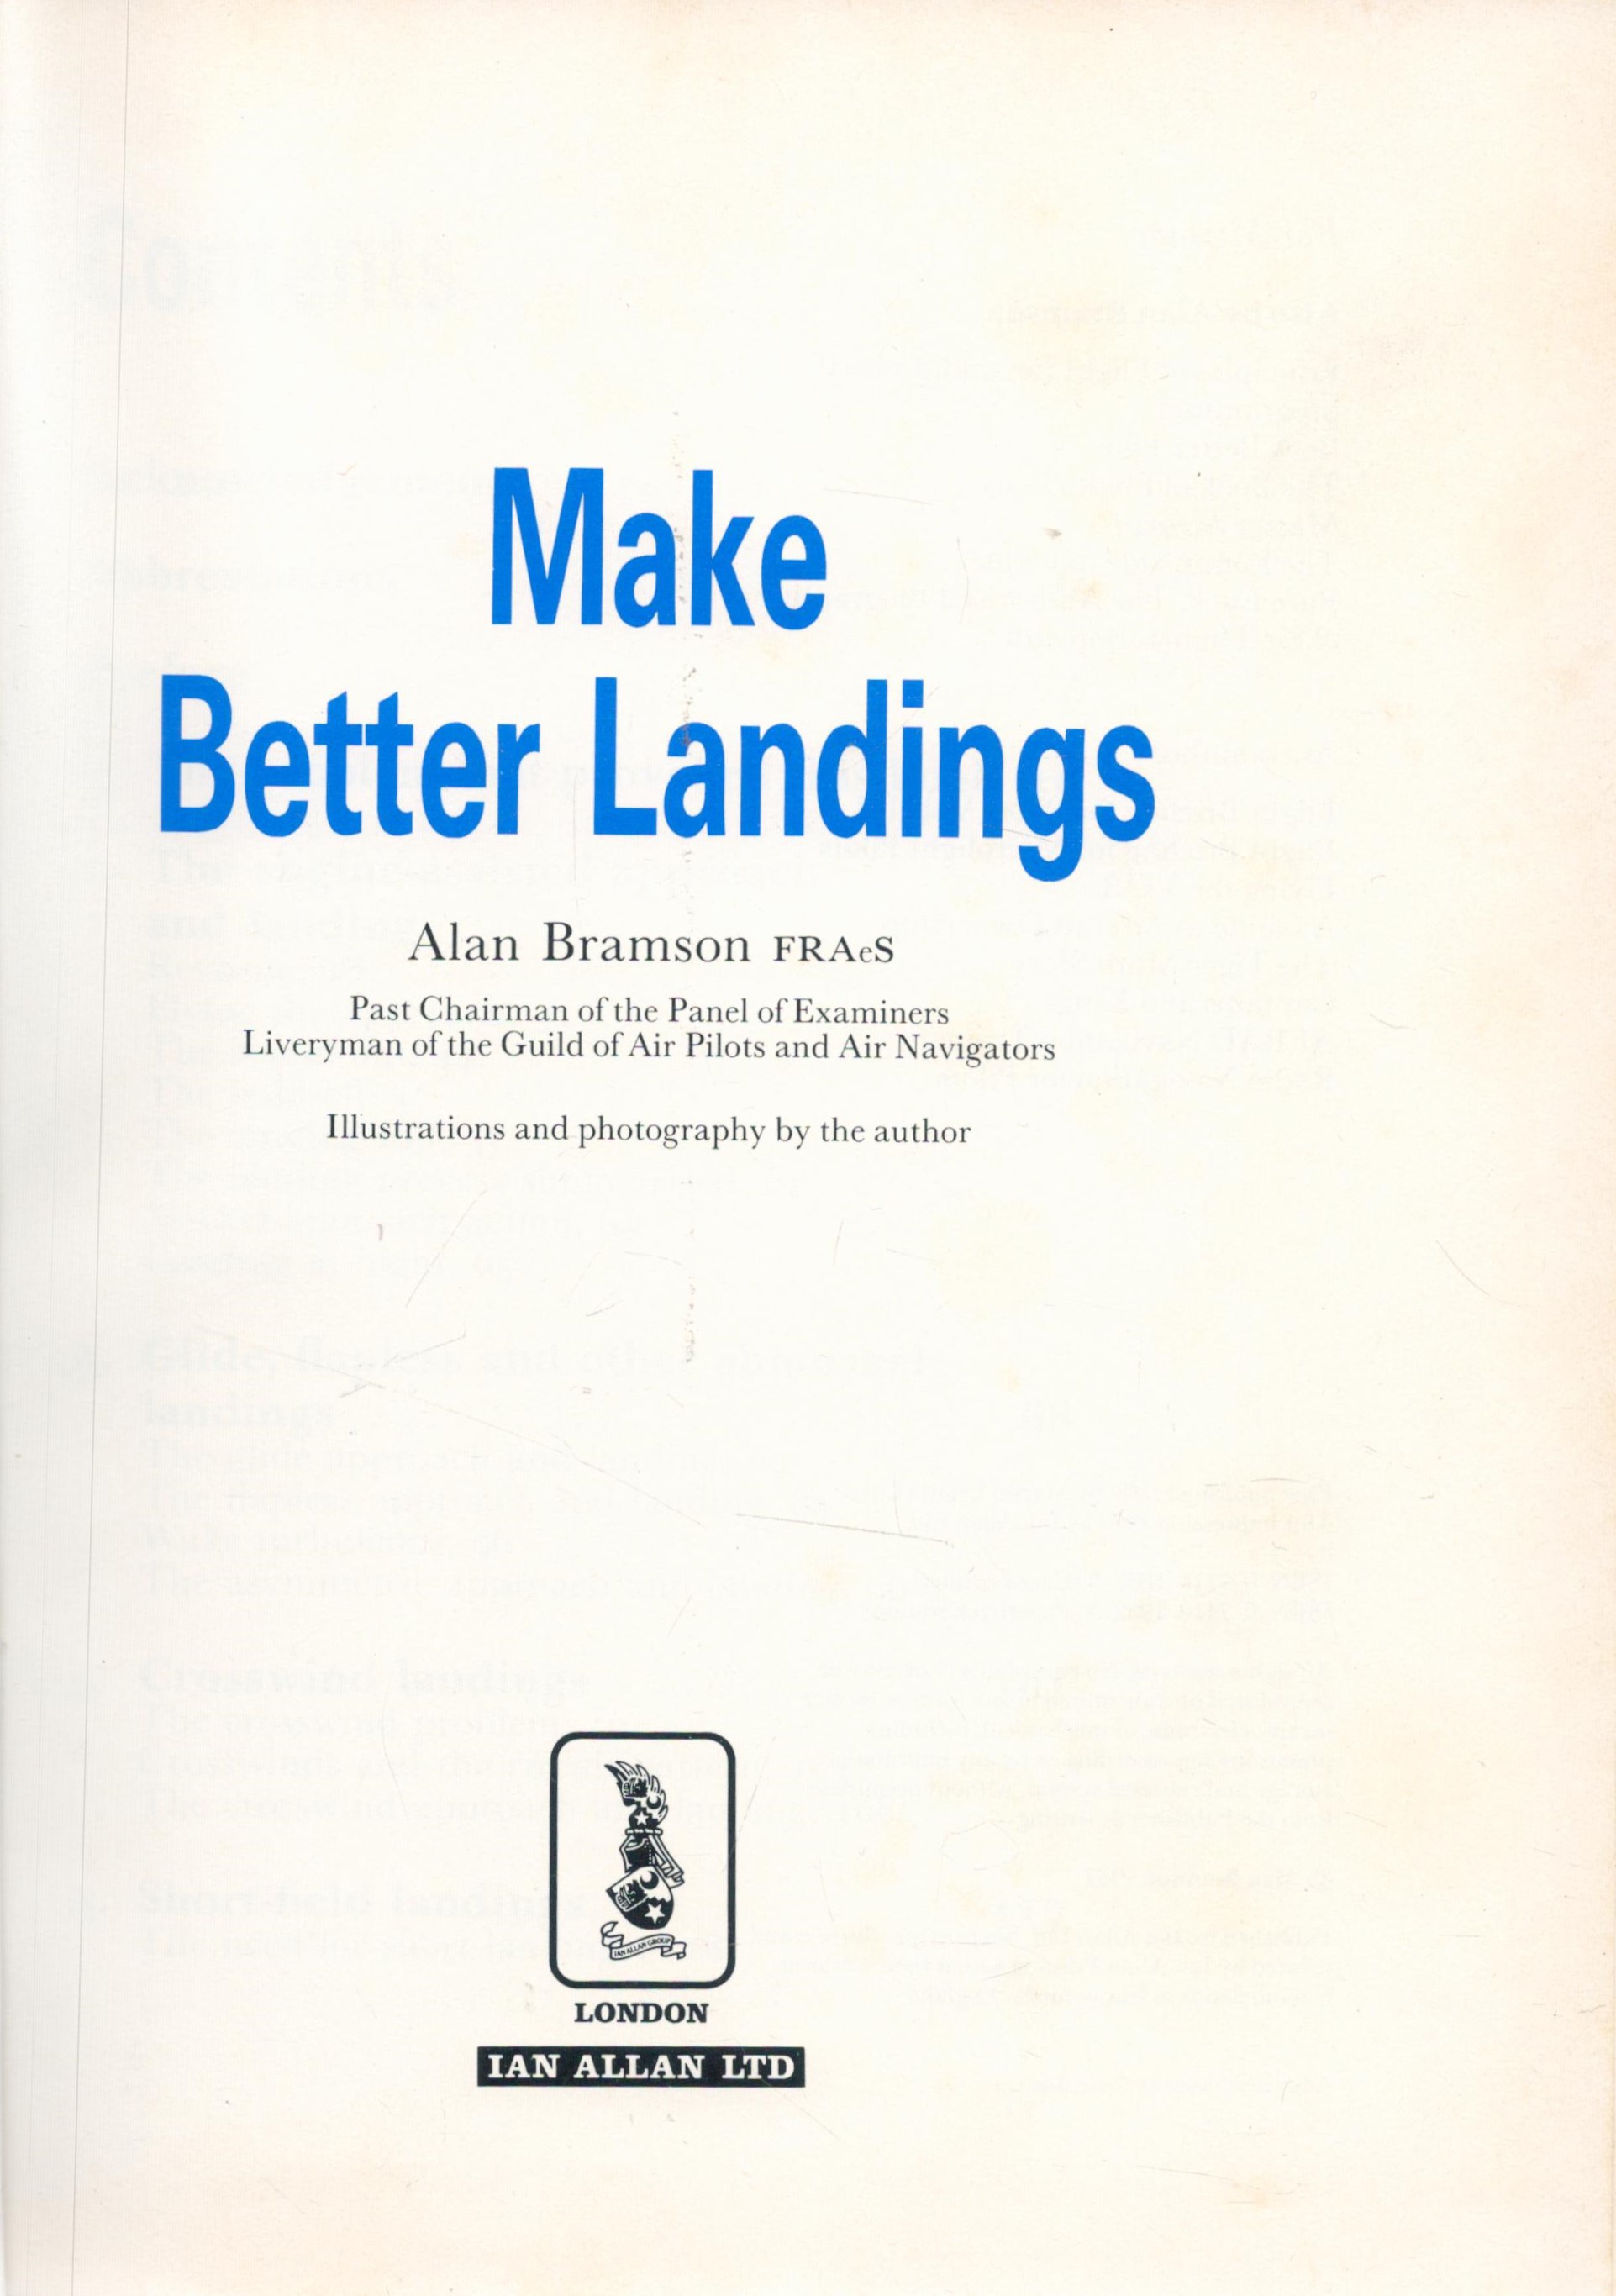 Make Better Landings by Alan Bramson 1990 Revised Edition Hardback Book with 252 pages published - Image 2 of 3